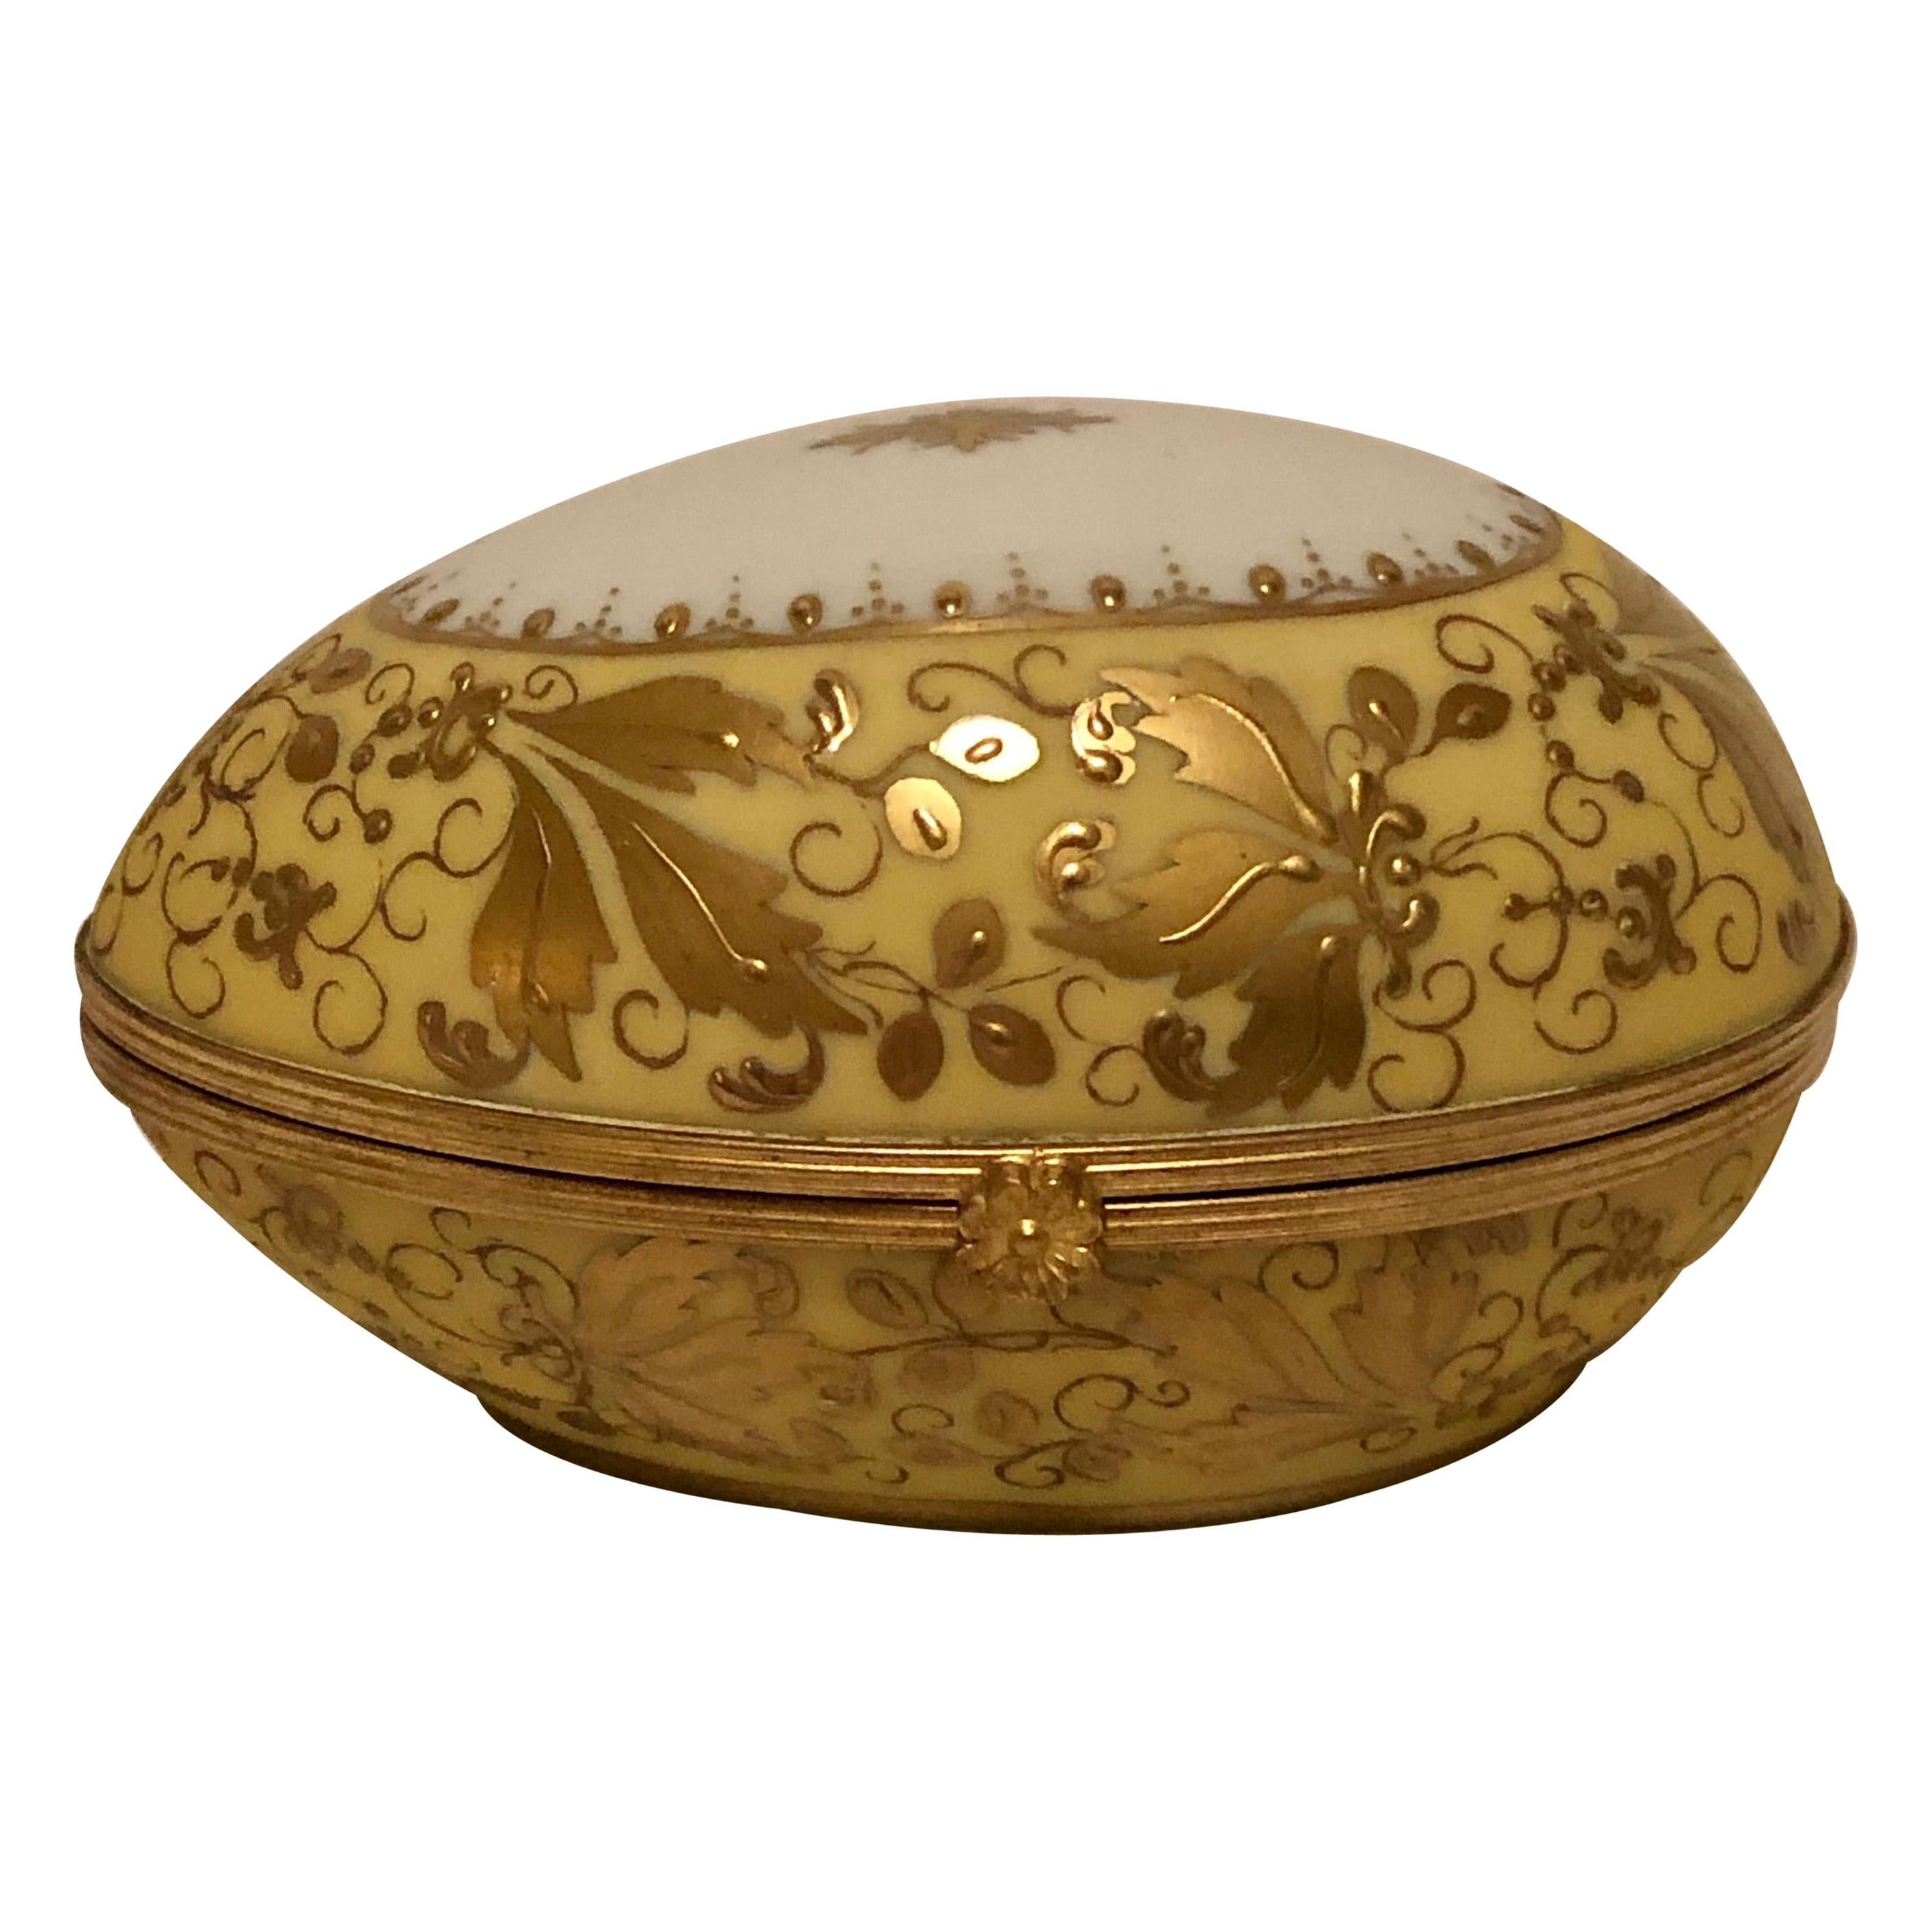 Le Tallec Porcelain Egg Shaped Box Decorated with Exquisite Raised Gilding